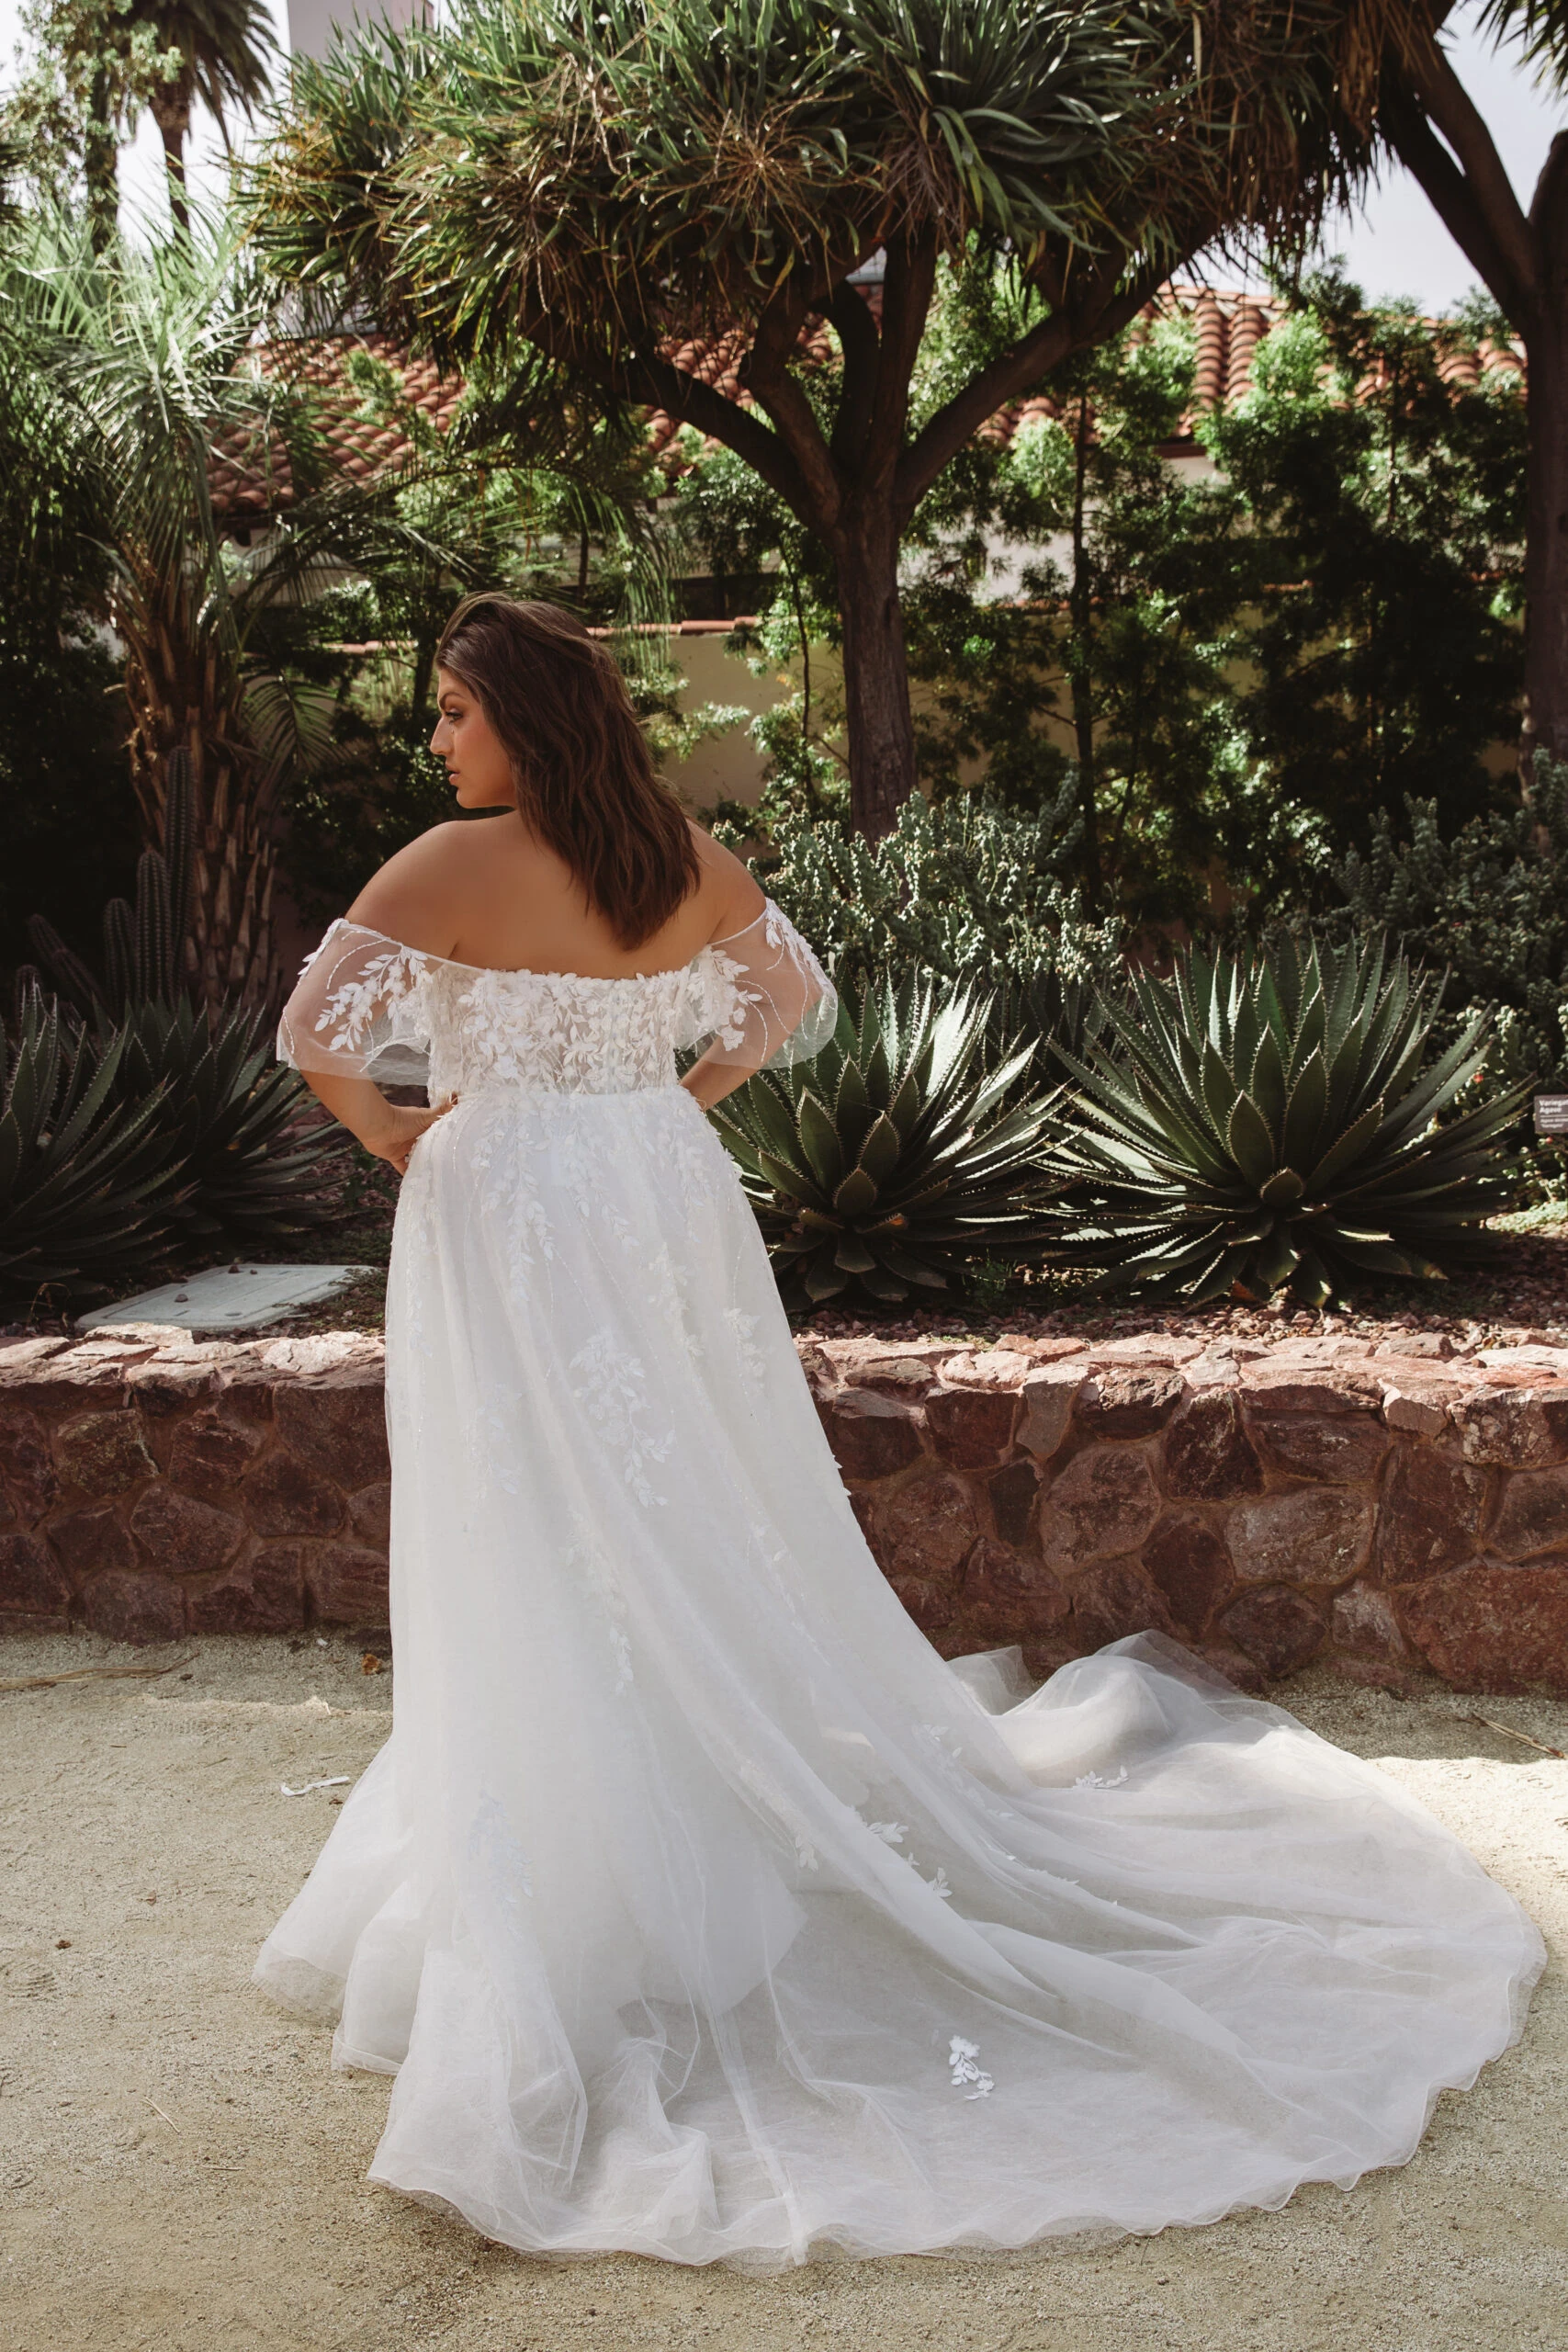 plus size a-line wedding dress with tulle skirt and off-the-shoulder sleeves - D3529+ by Essense of Australia